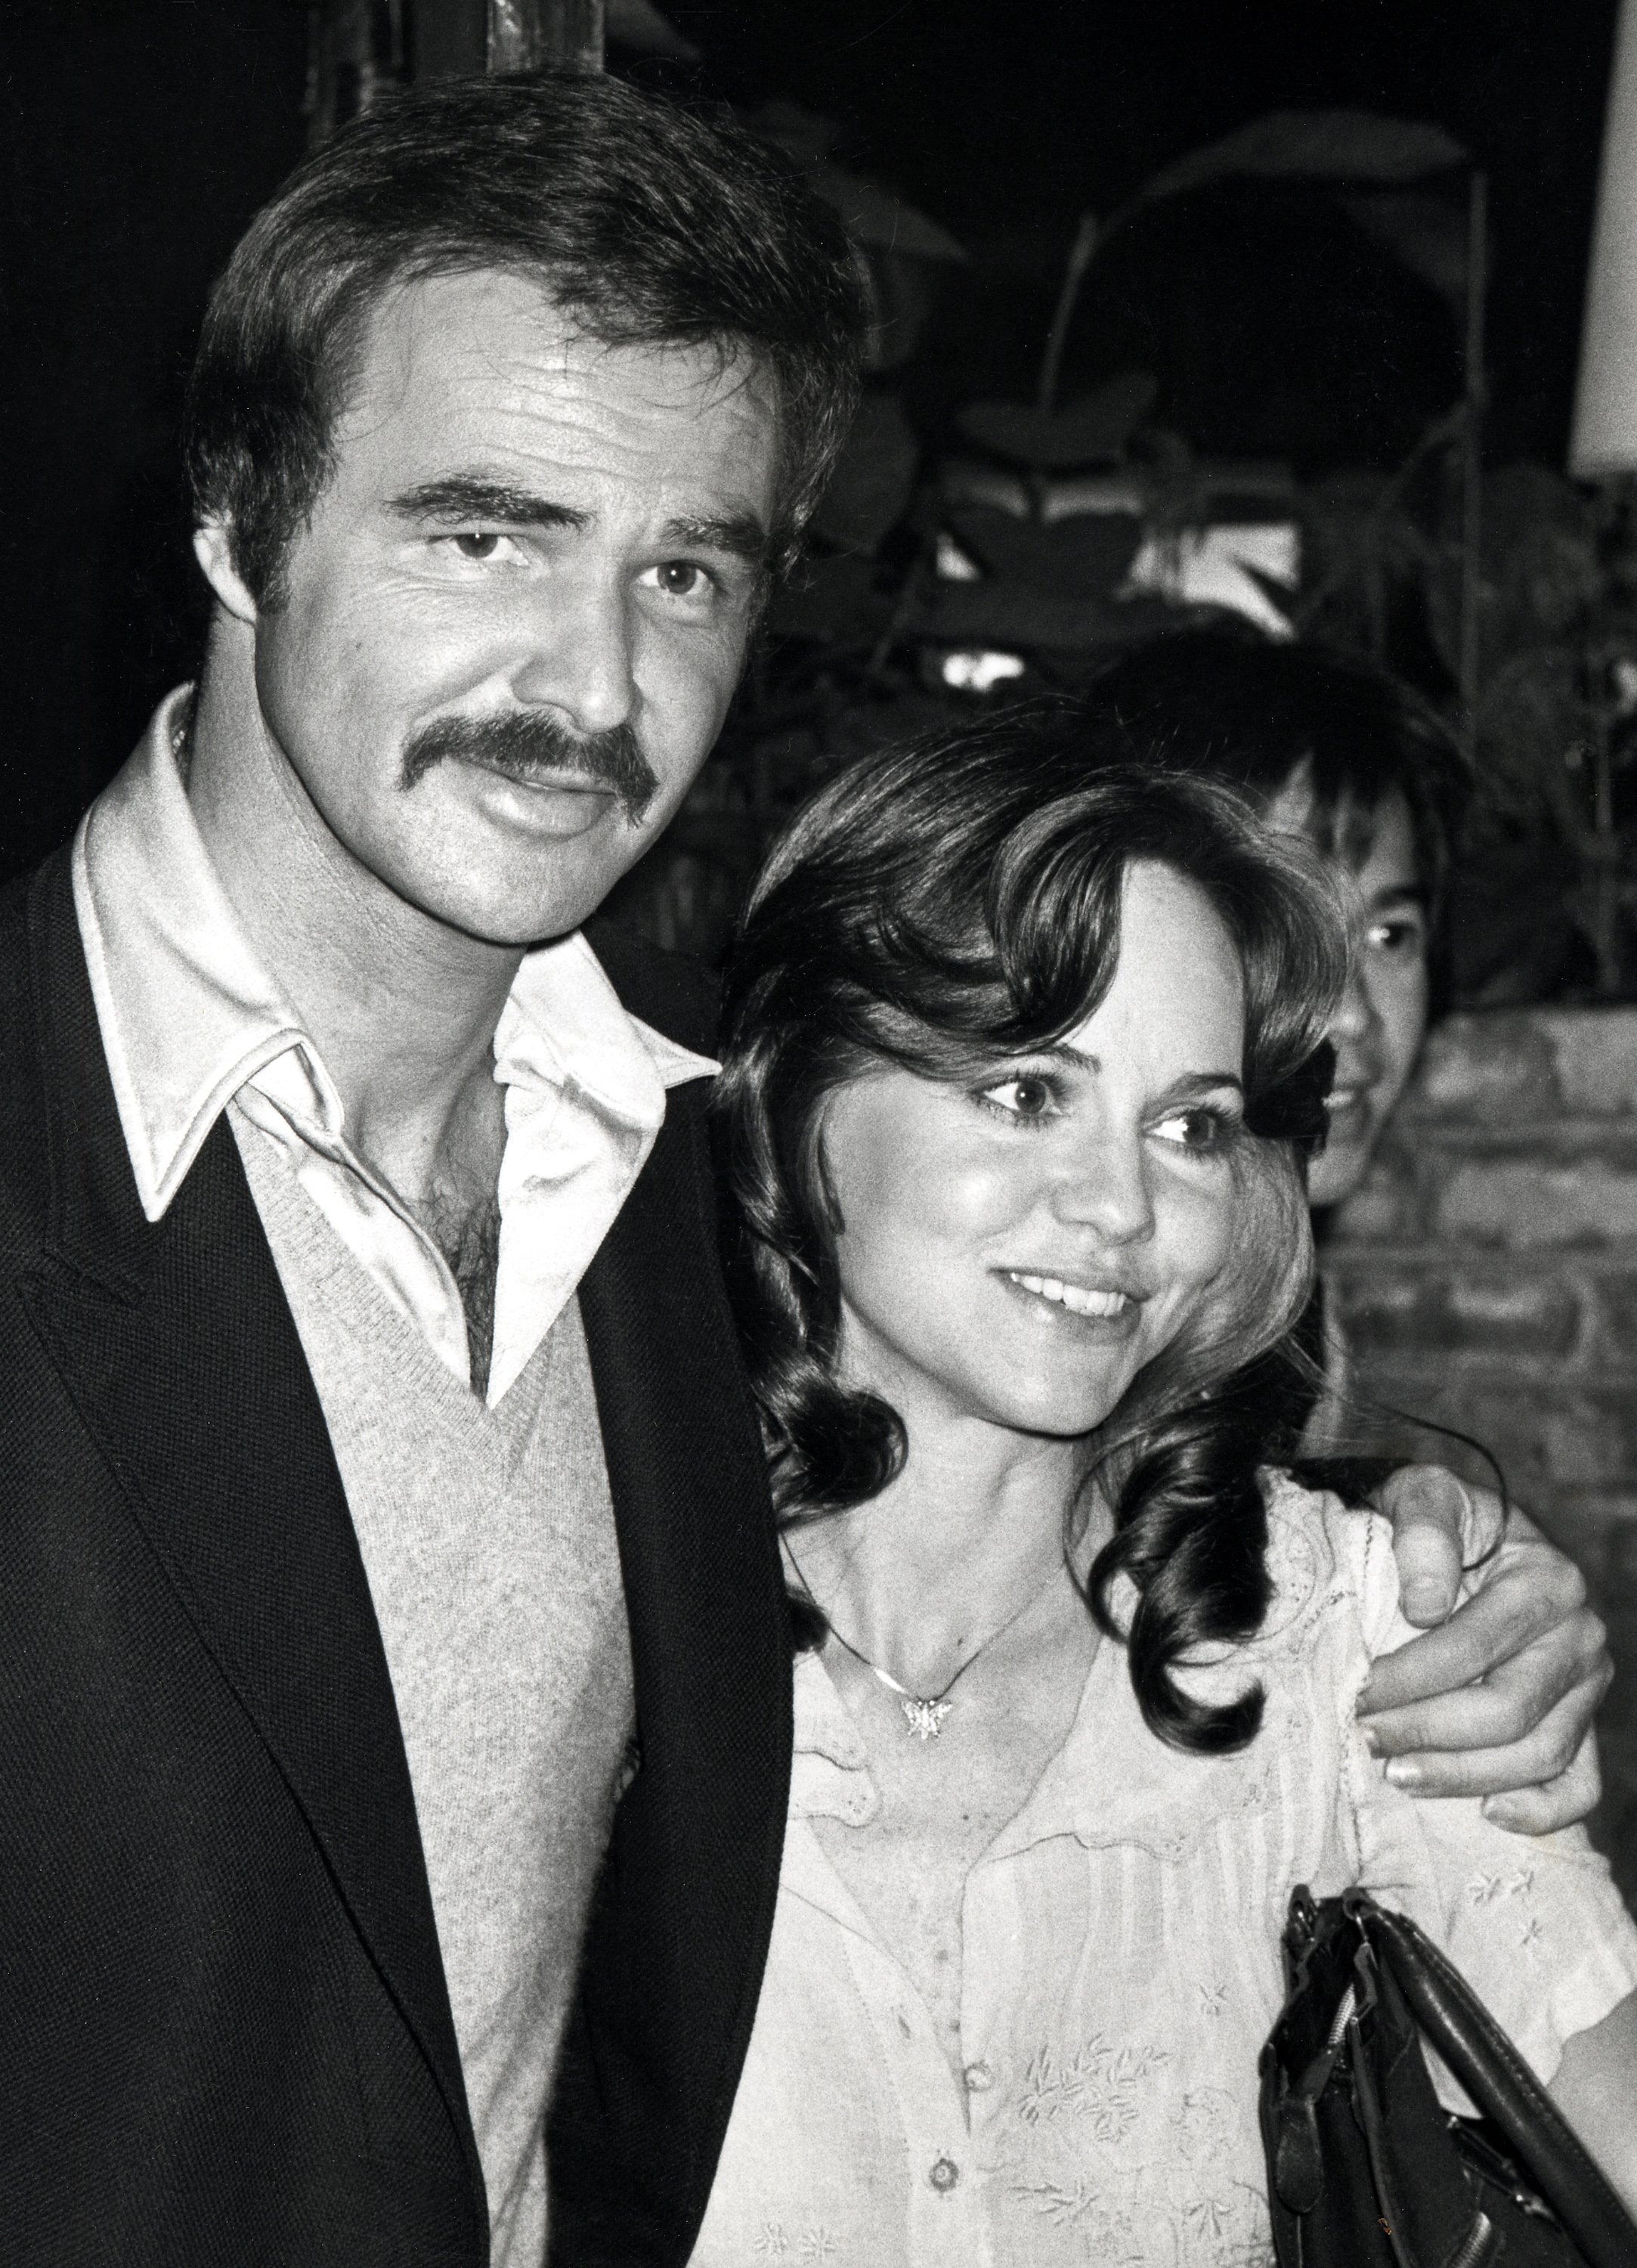 Actor Burt Reynolds and actress Sally Field during Bert Reynolds and Sally Field sighting at Steak Pit Restaurant on March 15, 1978 in Los Angeles, California ┃Source: Getty Images